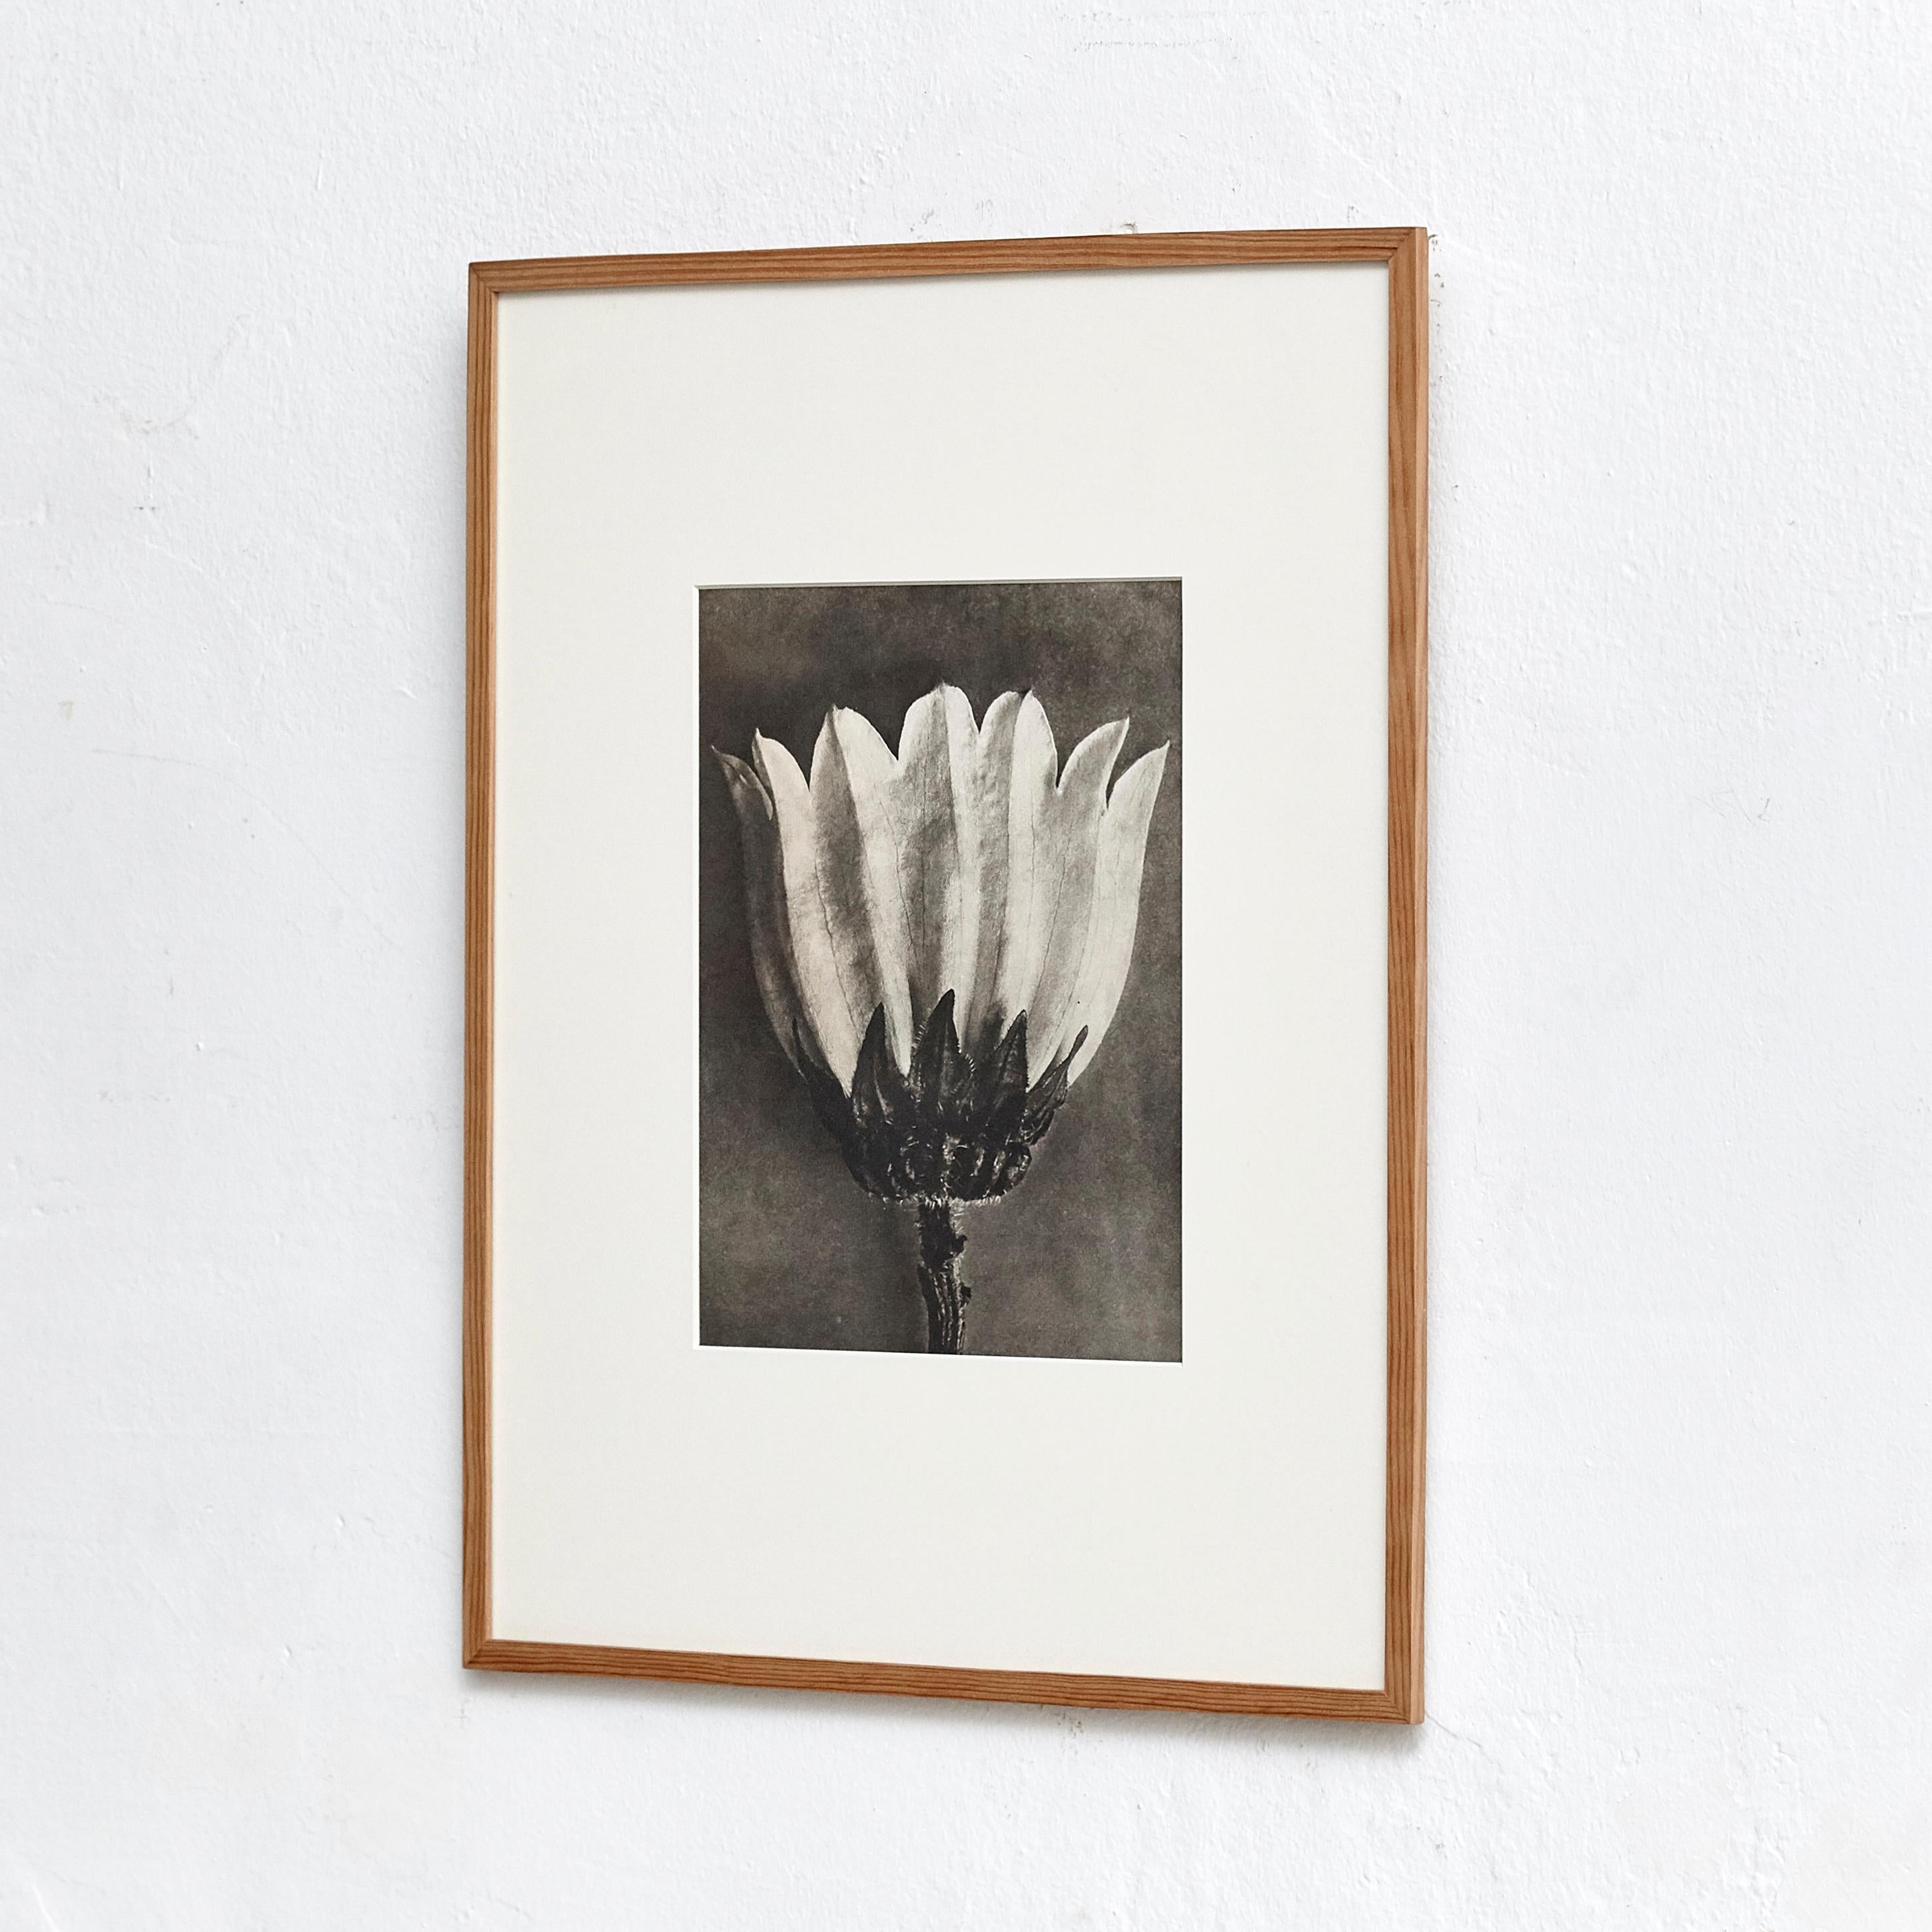 Karl Blossfeldt Photogravure from the edition of the book 'Wunder in der Natur' in 1942.

Photography number 61. 'Campanula medium. Glockenblume in 5 facher Vergrößerung.'

In original condition, with minor wear consistent with age and use,